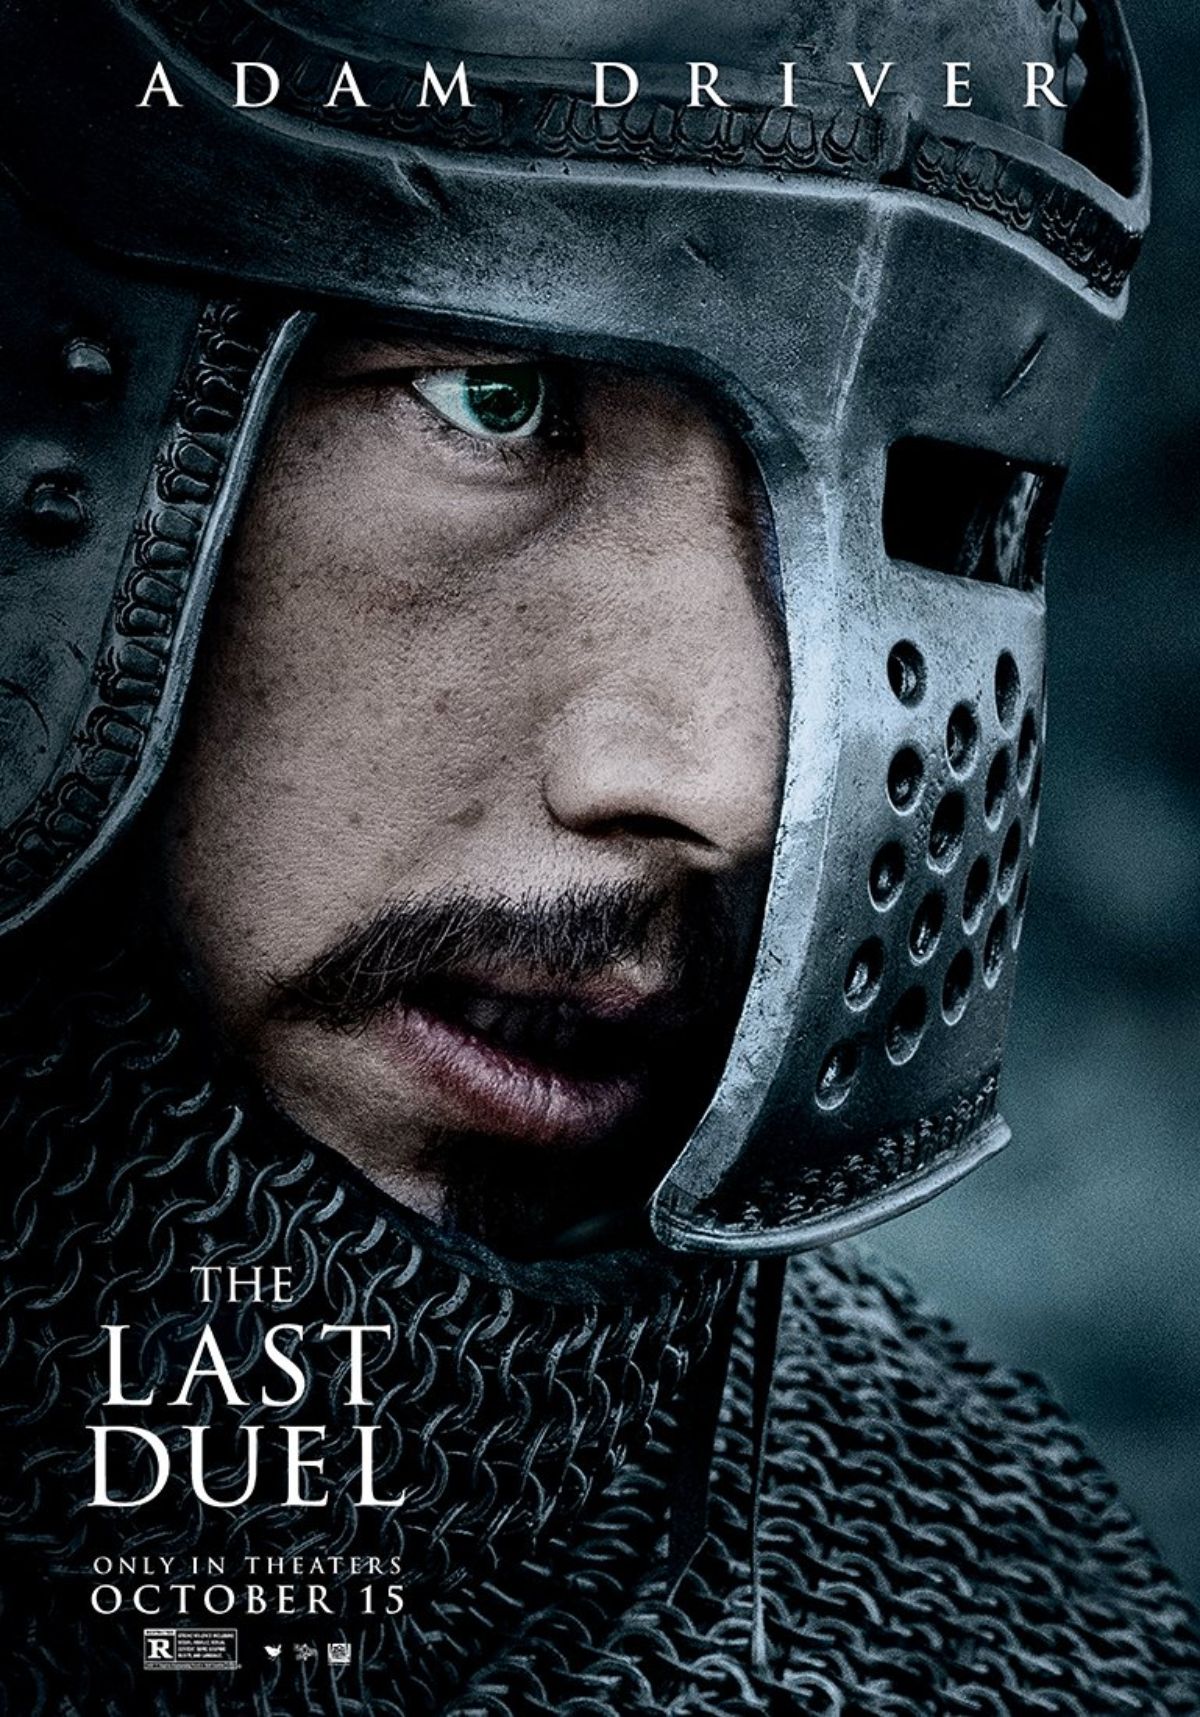 the-last-duel-adam-driver-poster-1